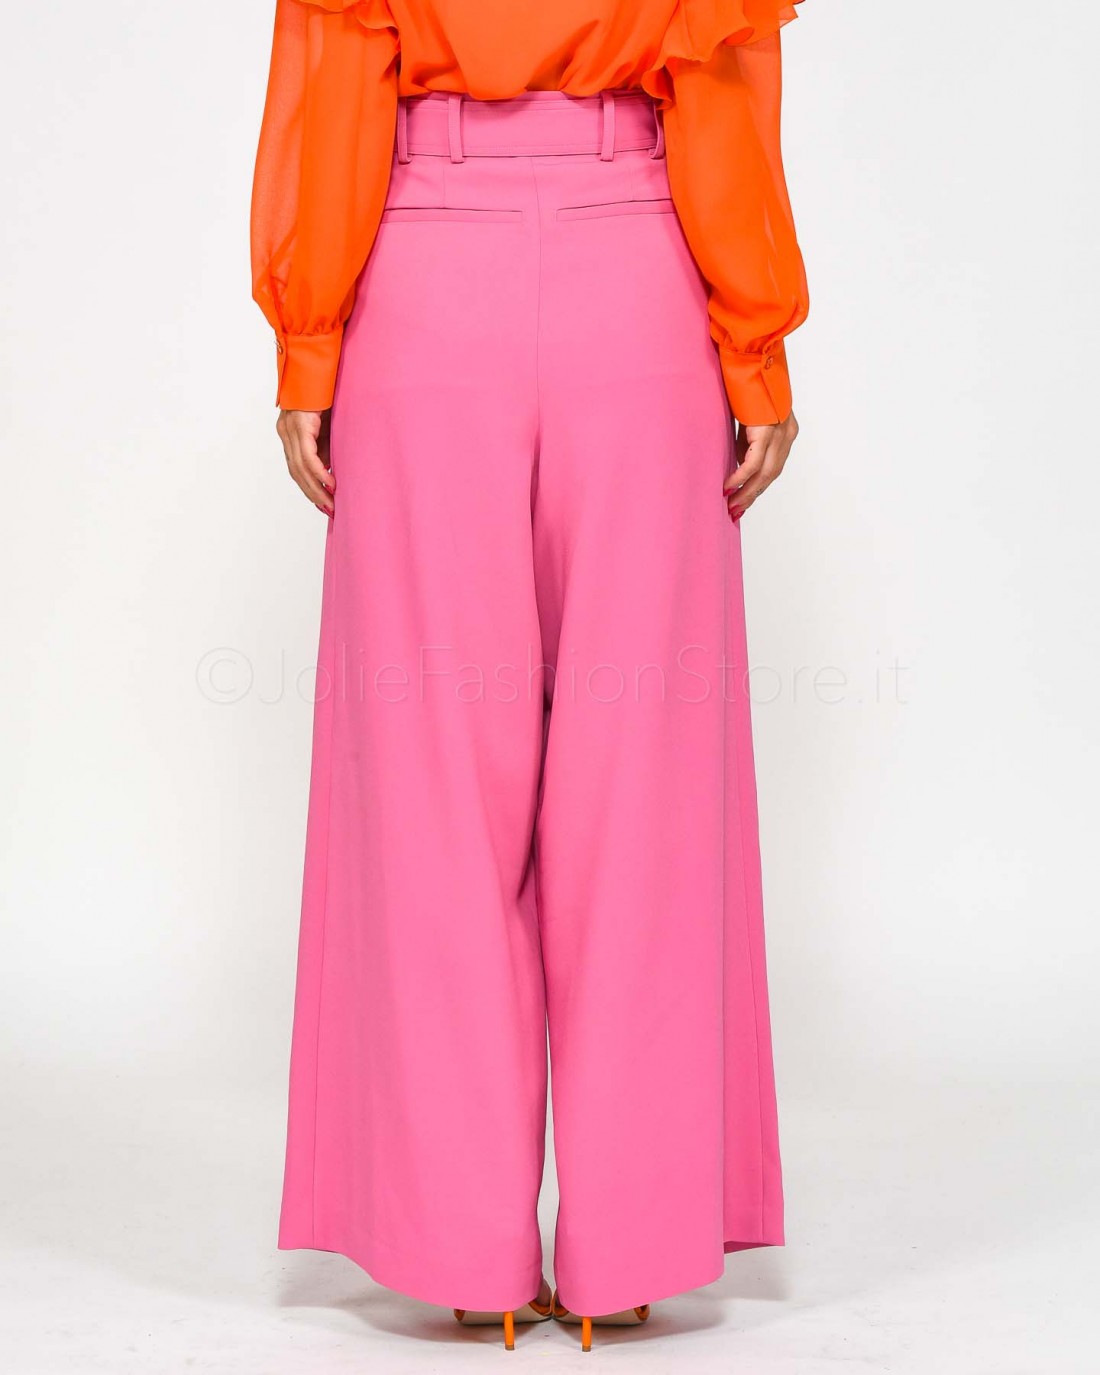 Pink palazzo pants with pockets and belt